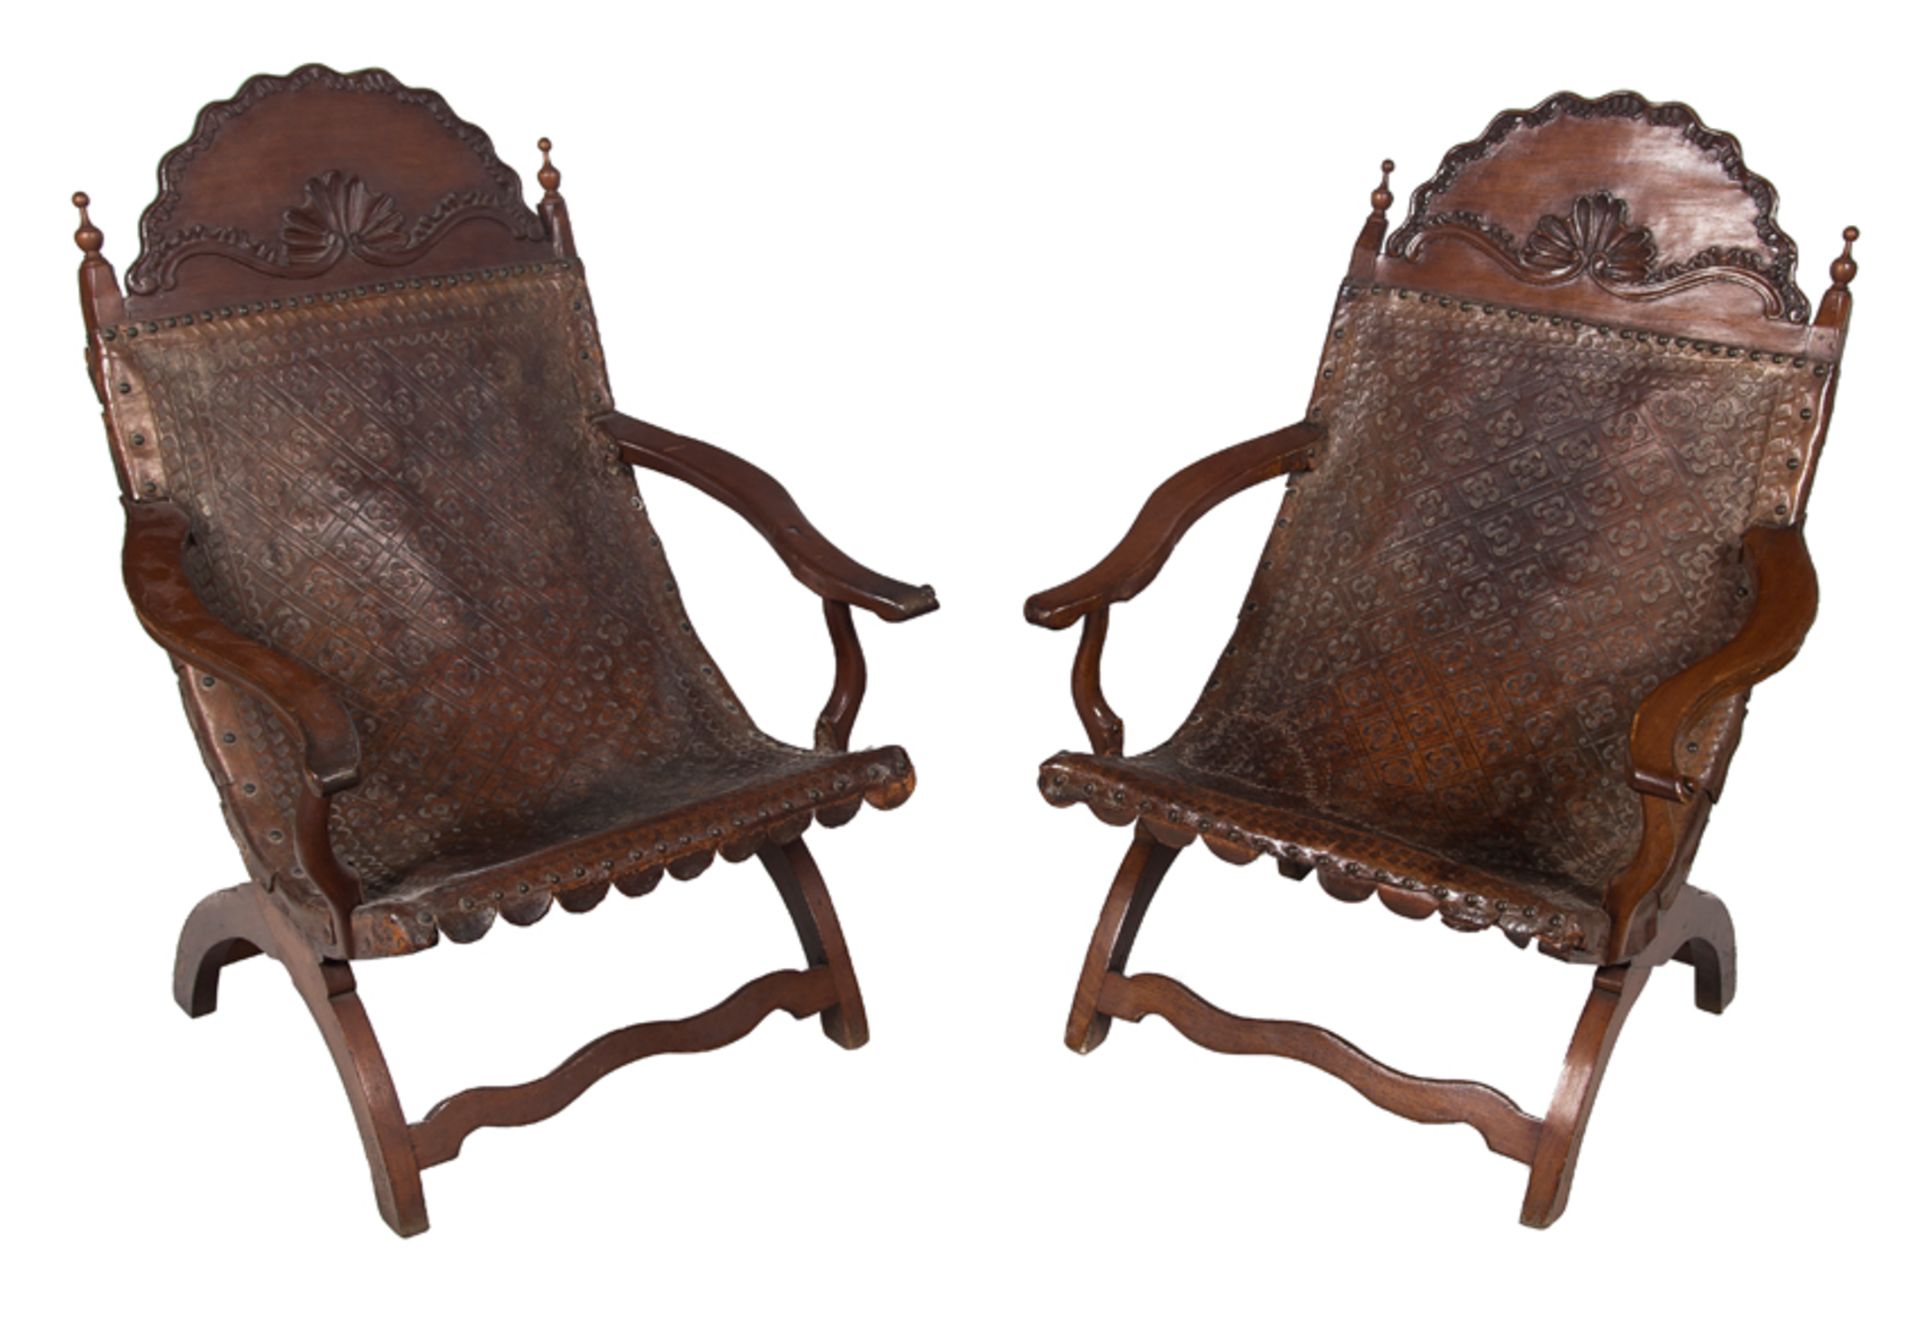 Pair of "Campeche" chairs. Made of cedar wood and leather. Mexico. Late 18th century.